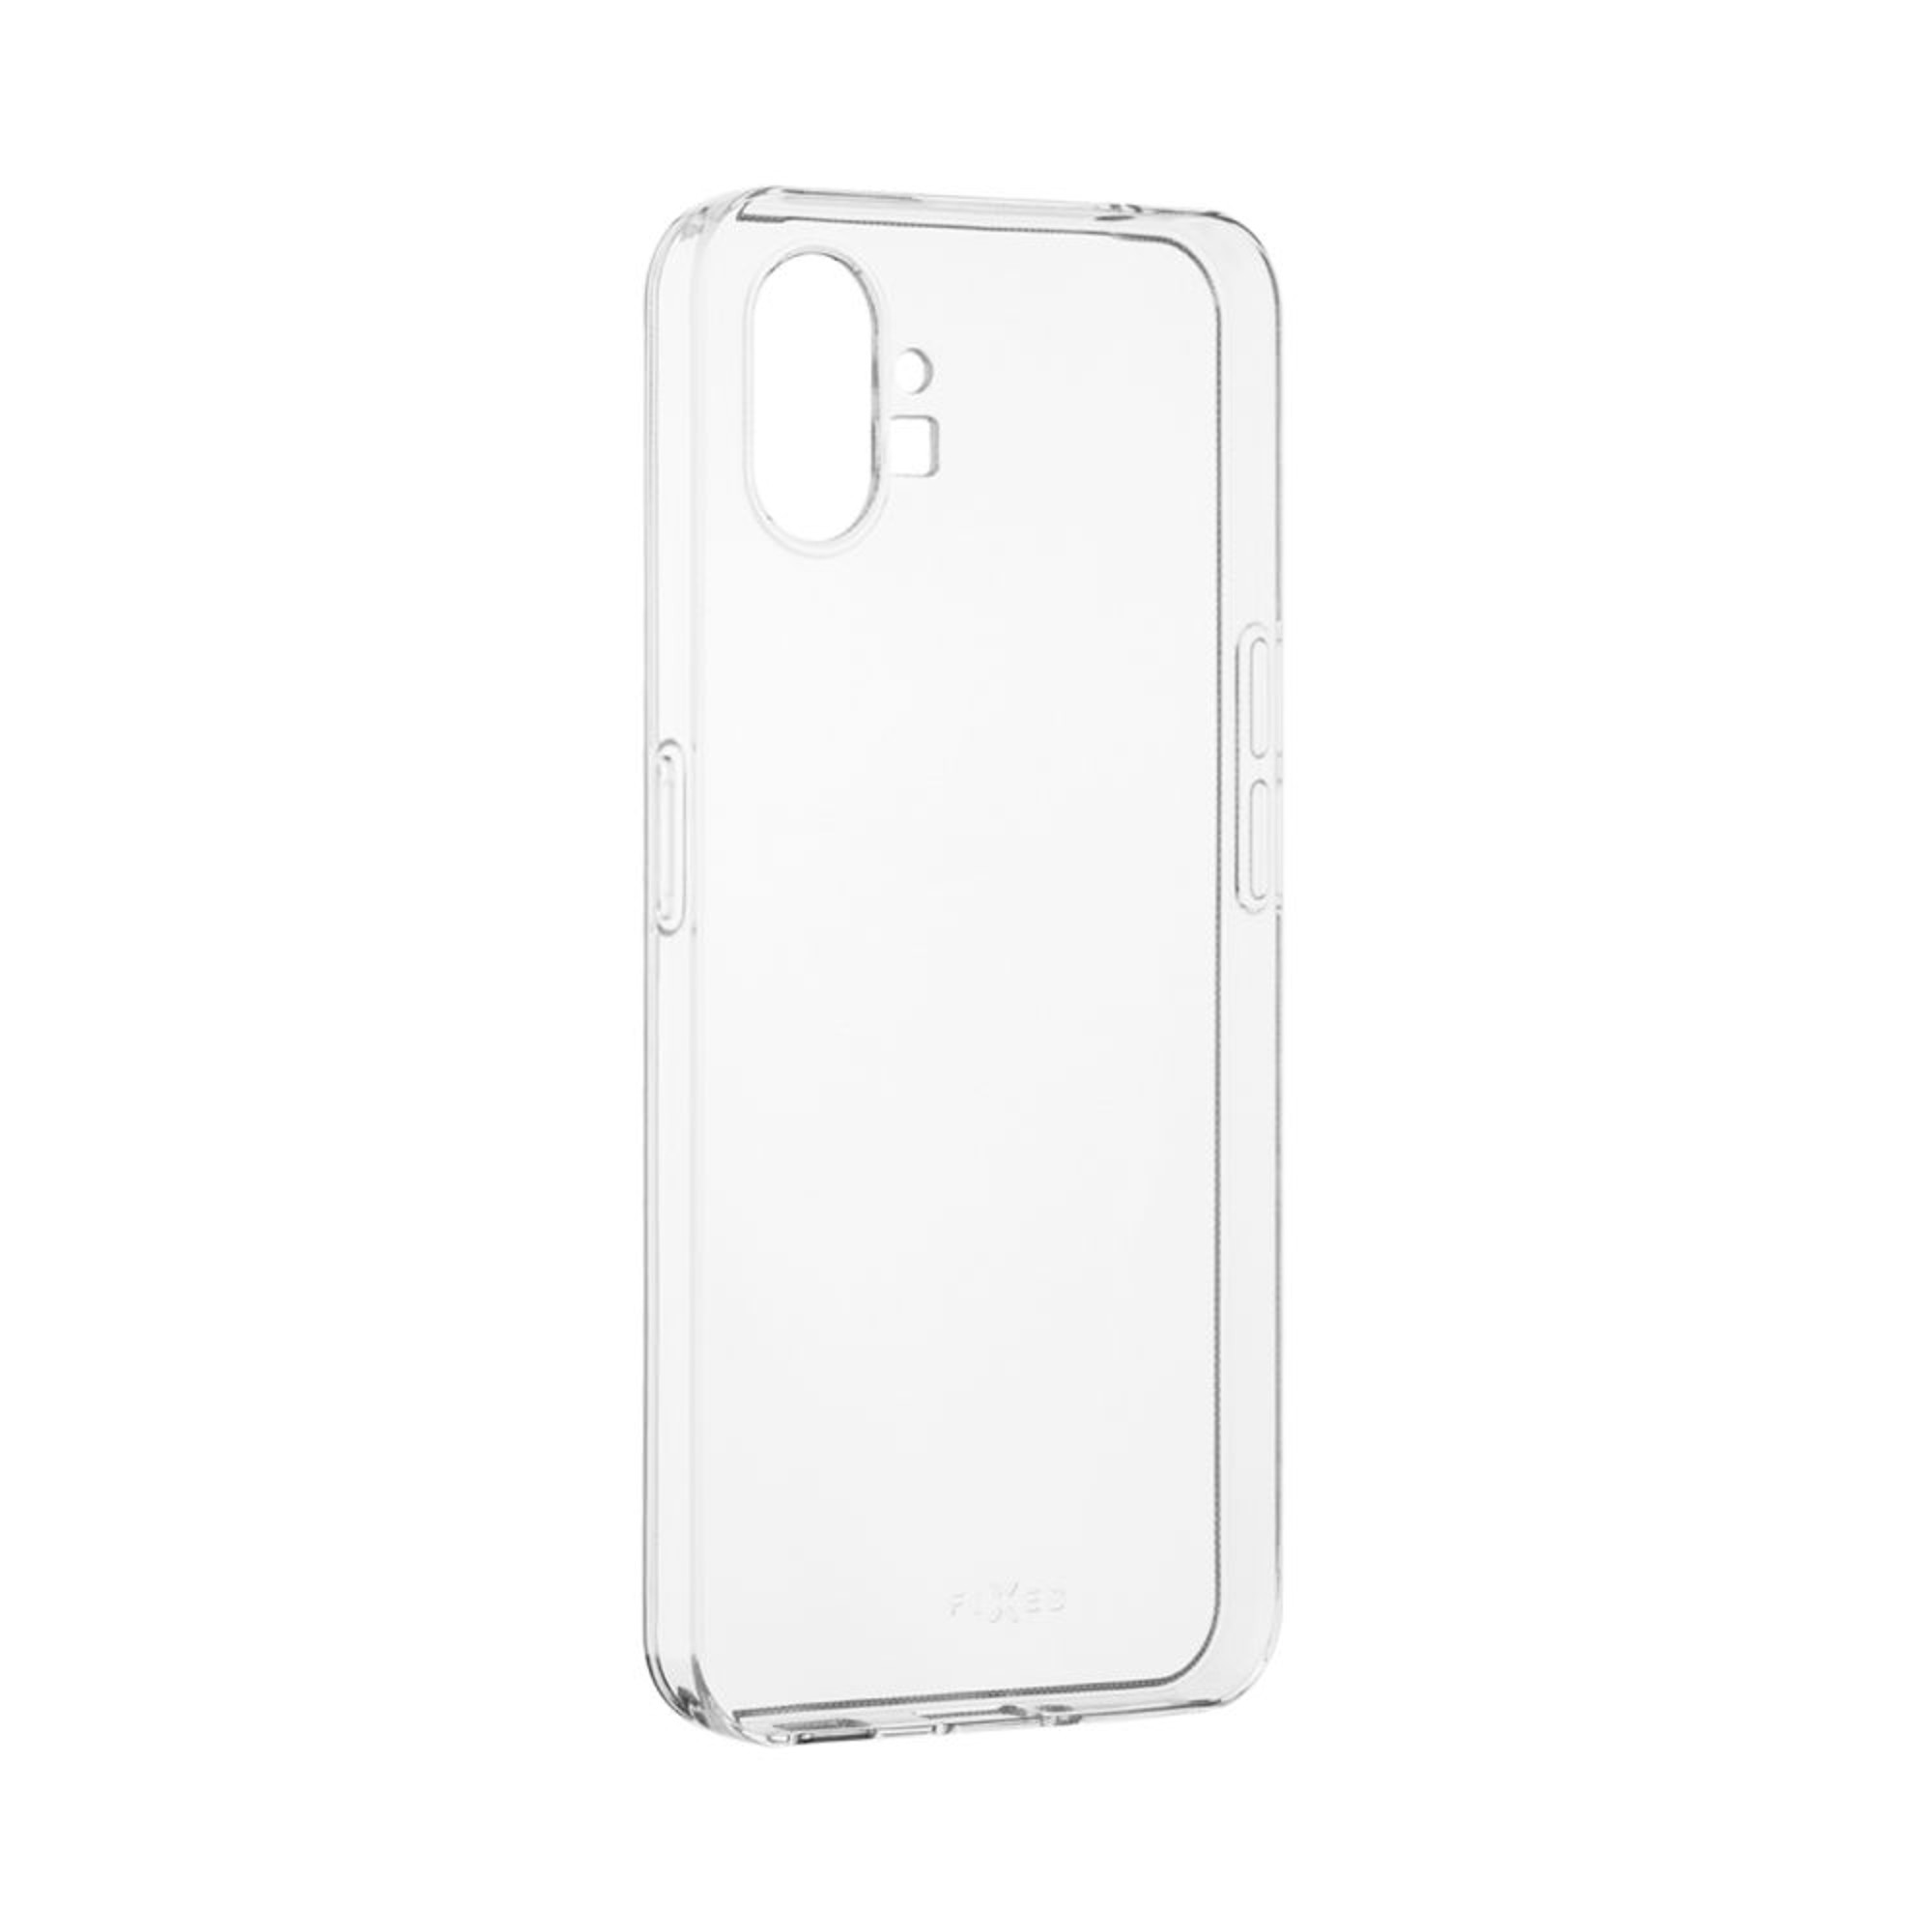 FIXED FIXTCC-1005, Backcover, Transparente phone Nothing, (1)